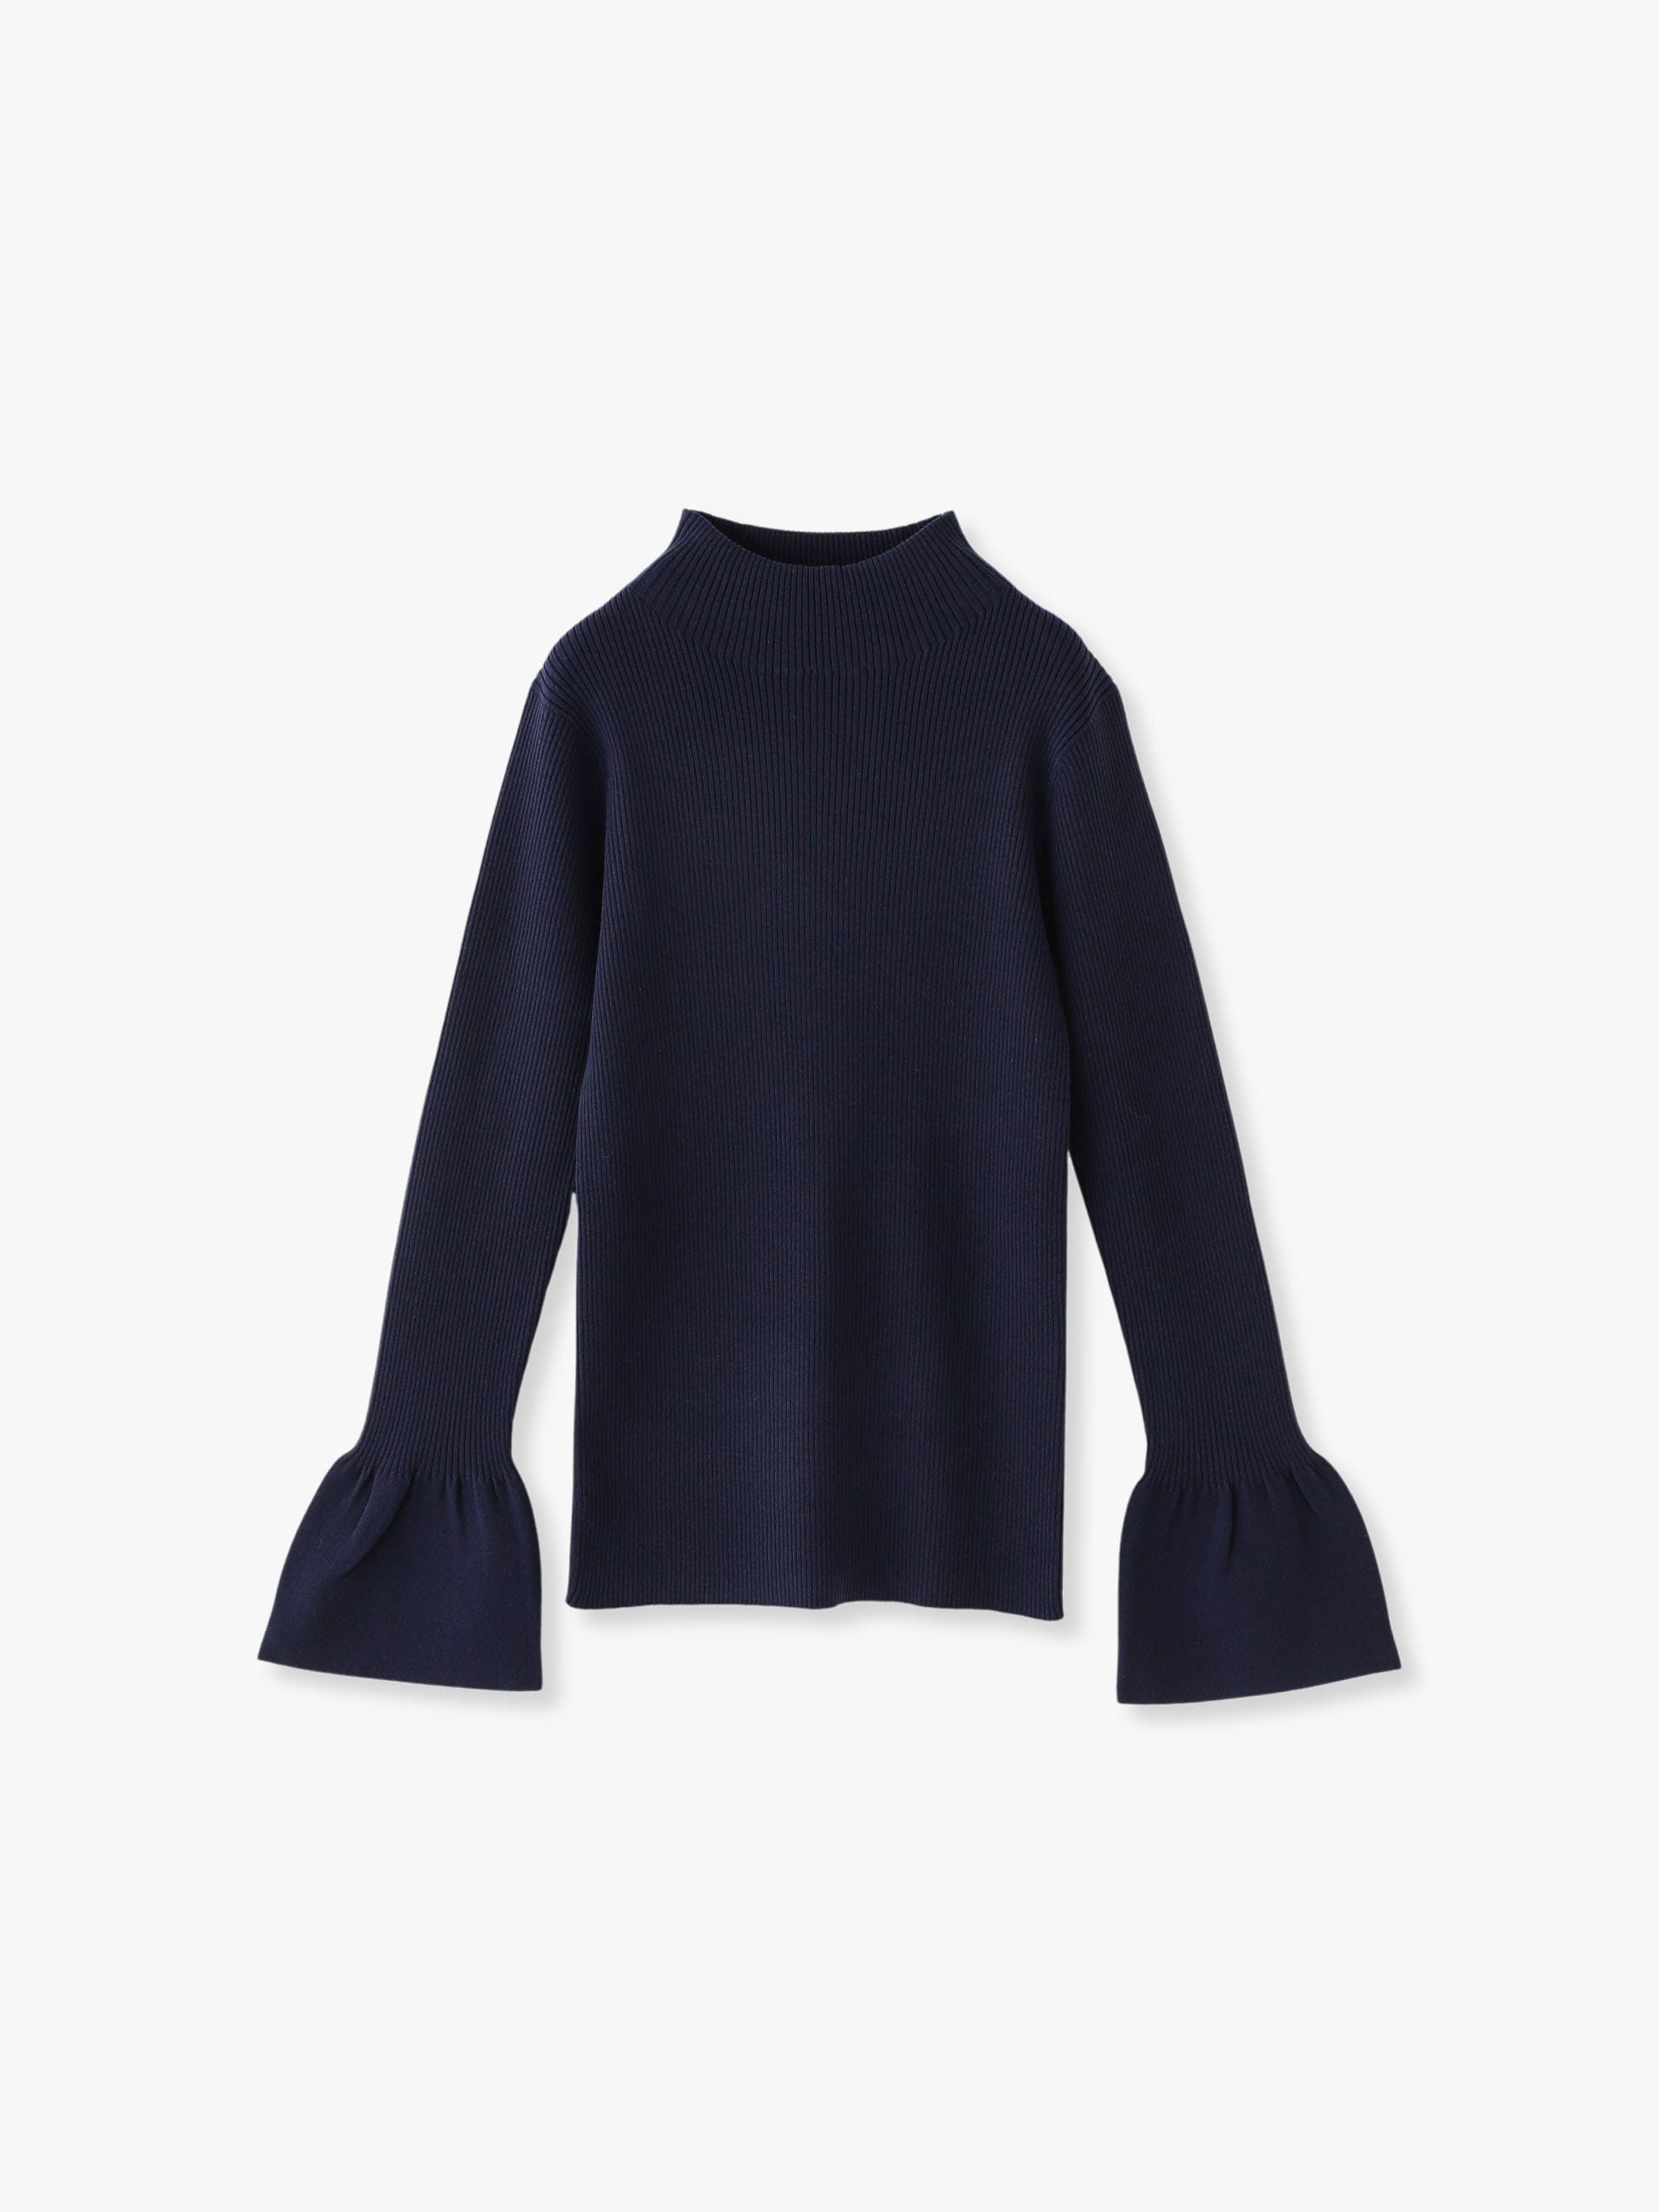 Bell Sleeve Knit Pullover 詳細画像 navy 4